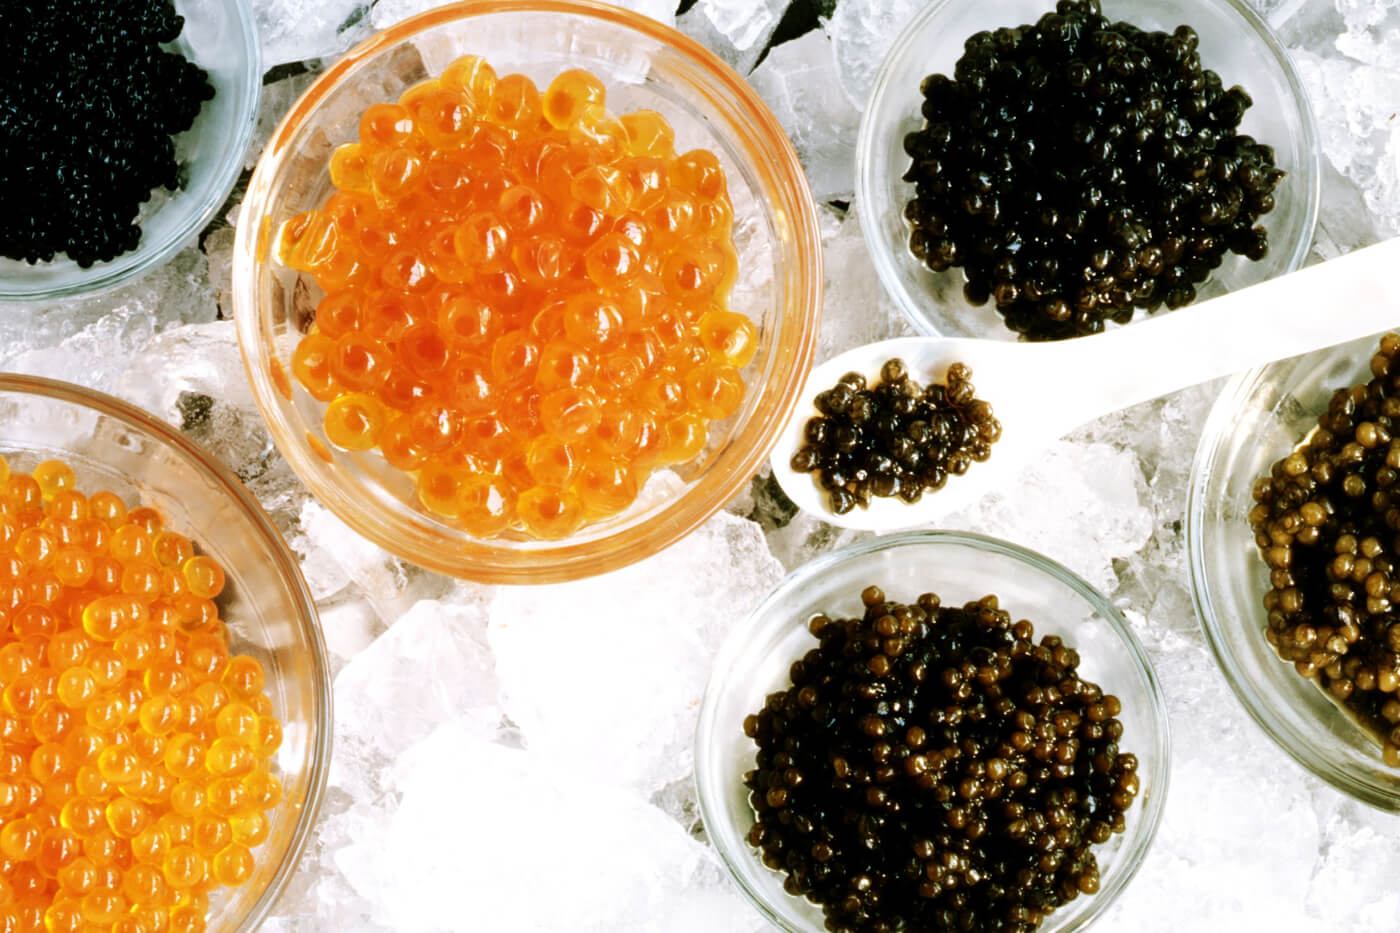 Where Does Caviar Come From? Everything You Need to Know